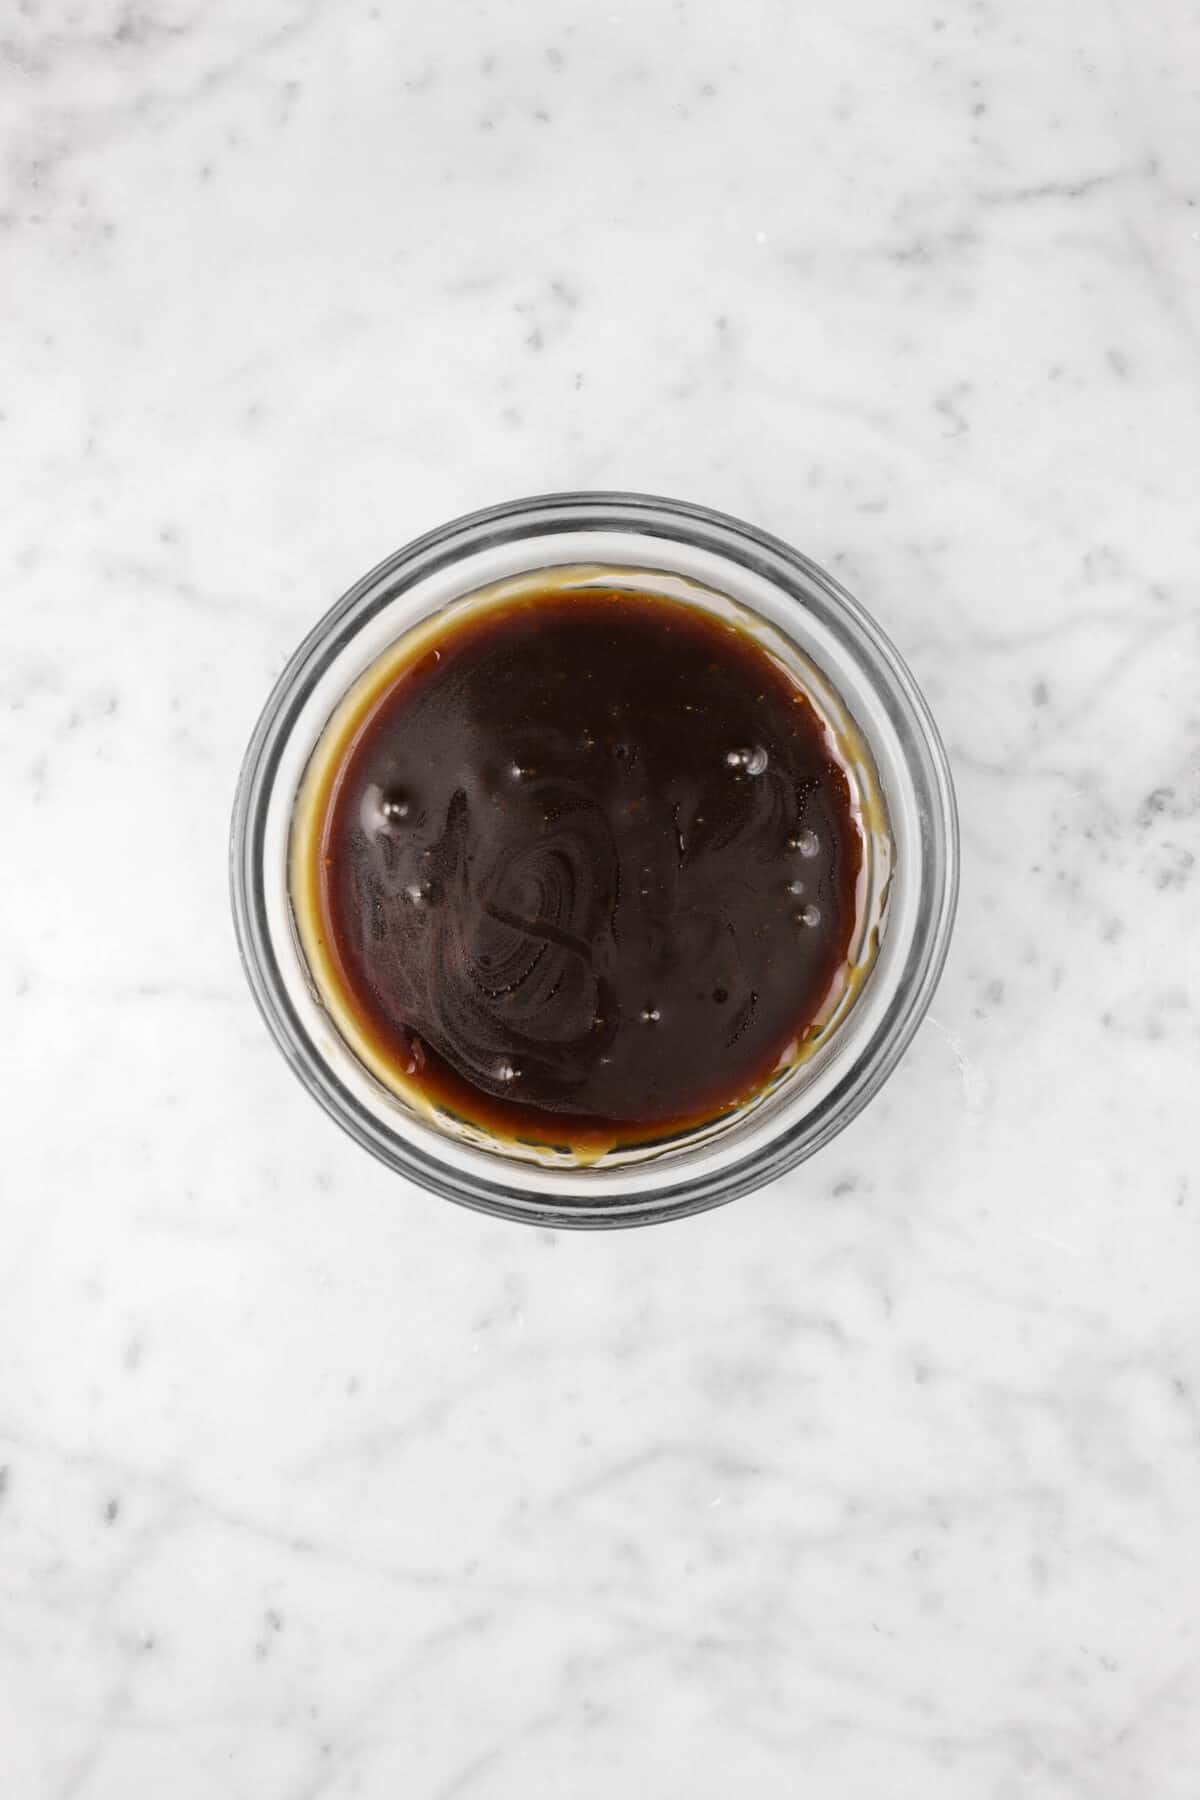 balsamic vinaigrette in a glass bowl on a marble counter